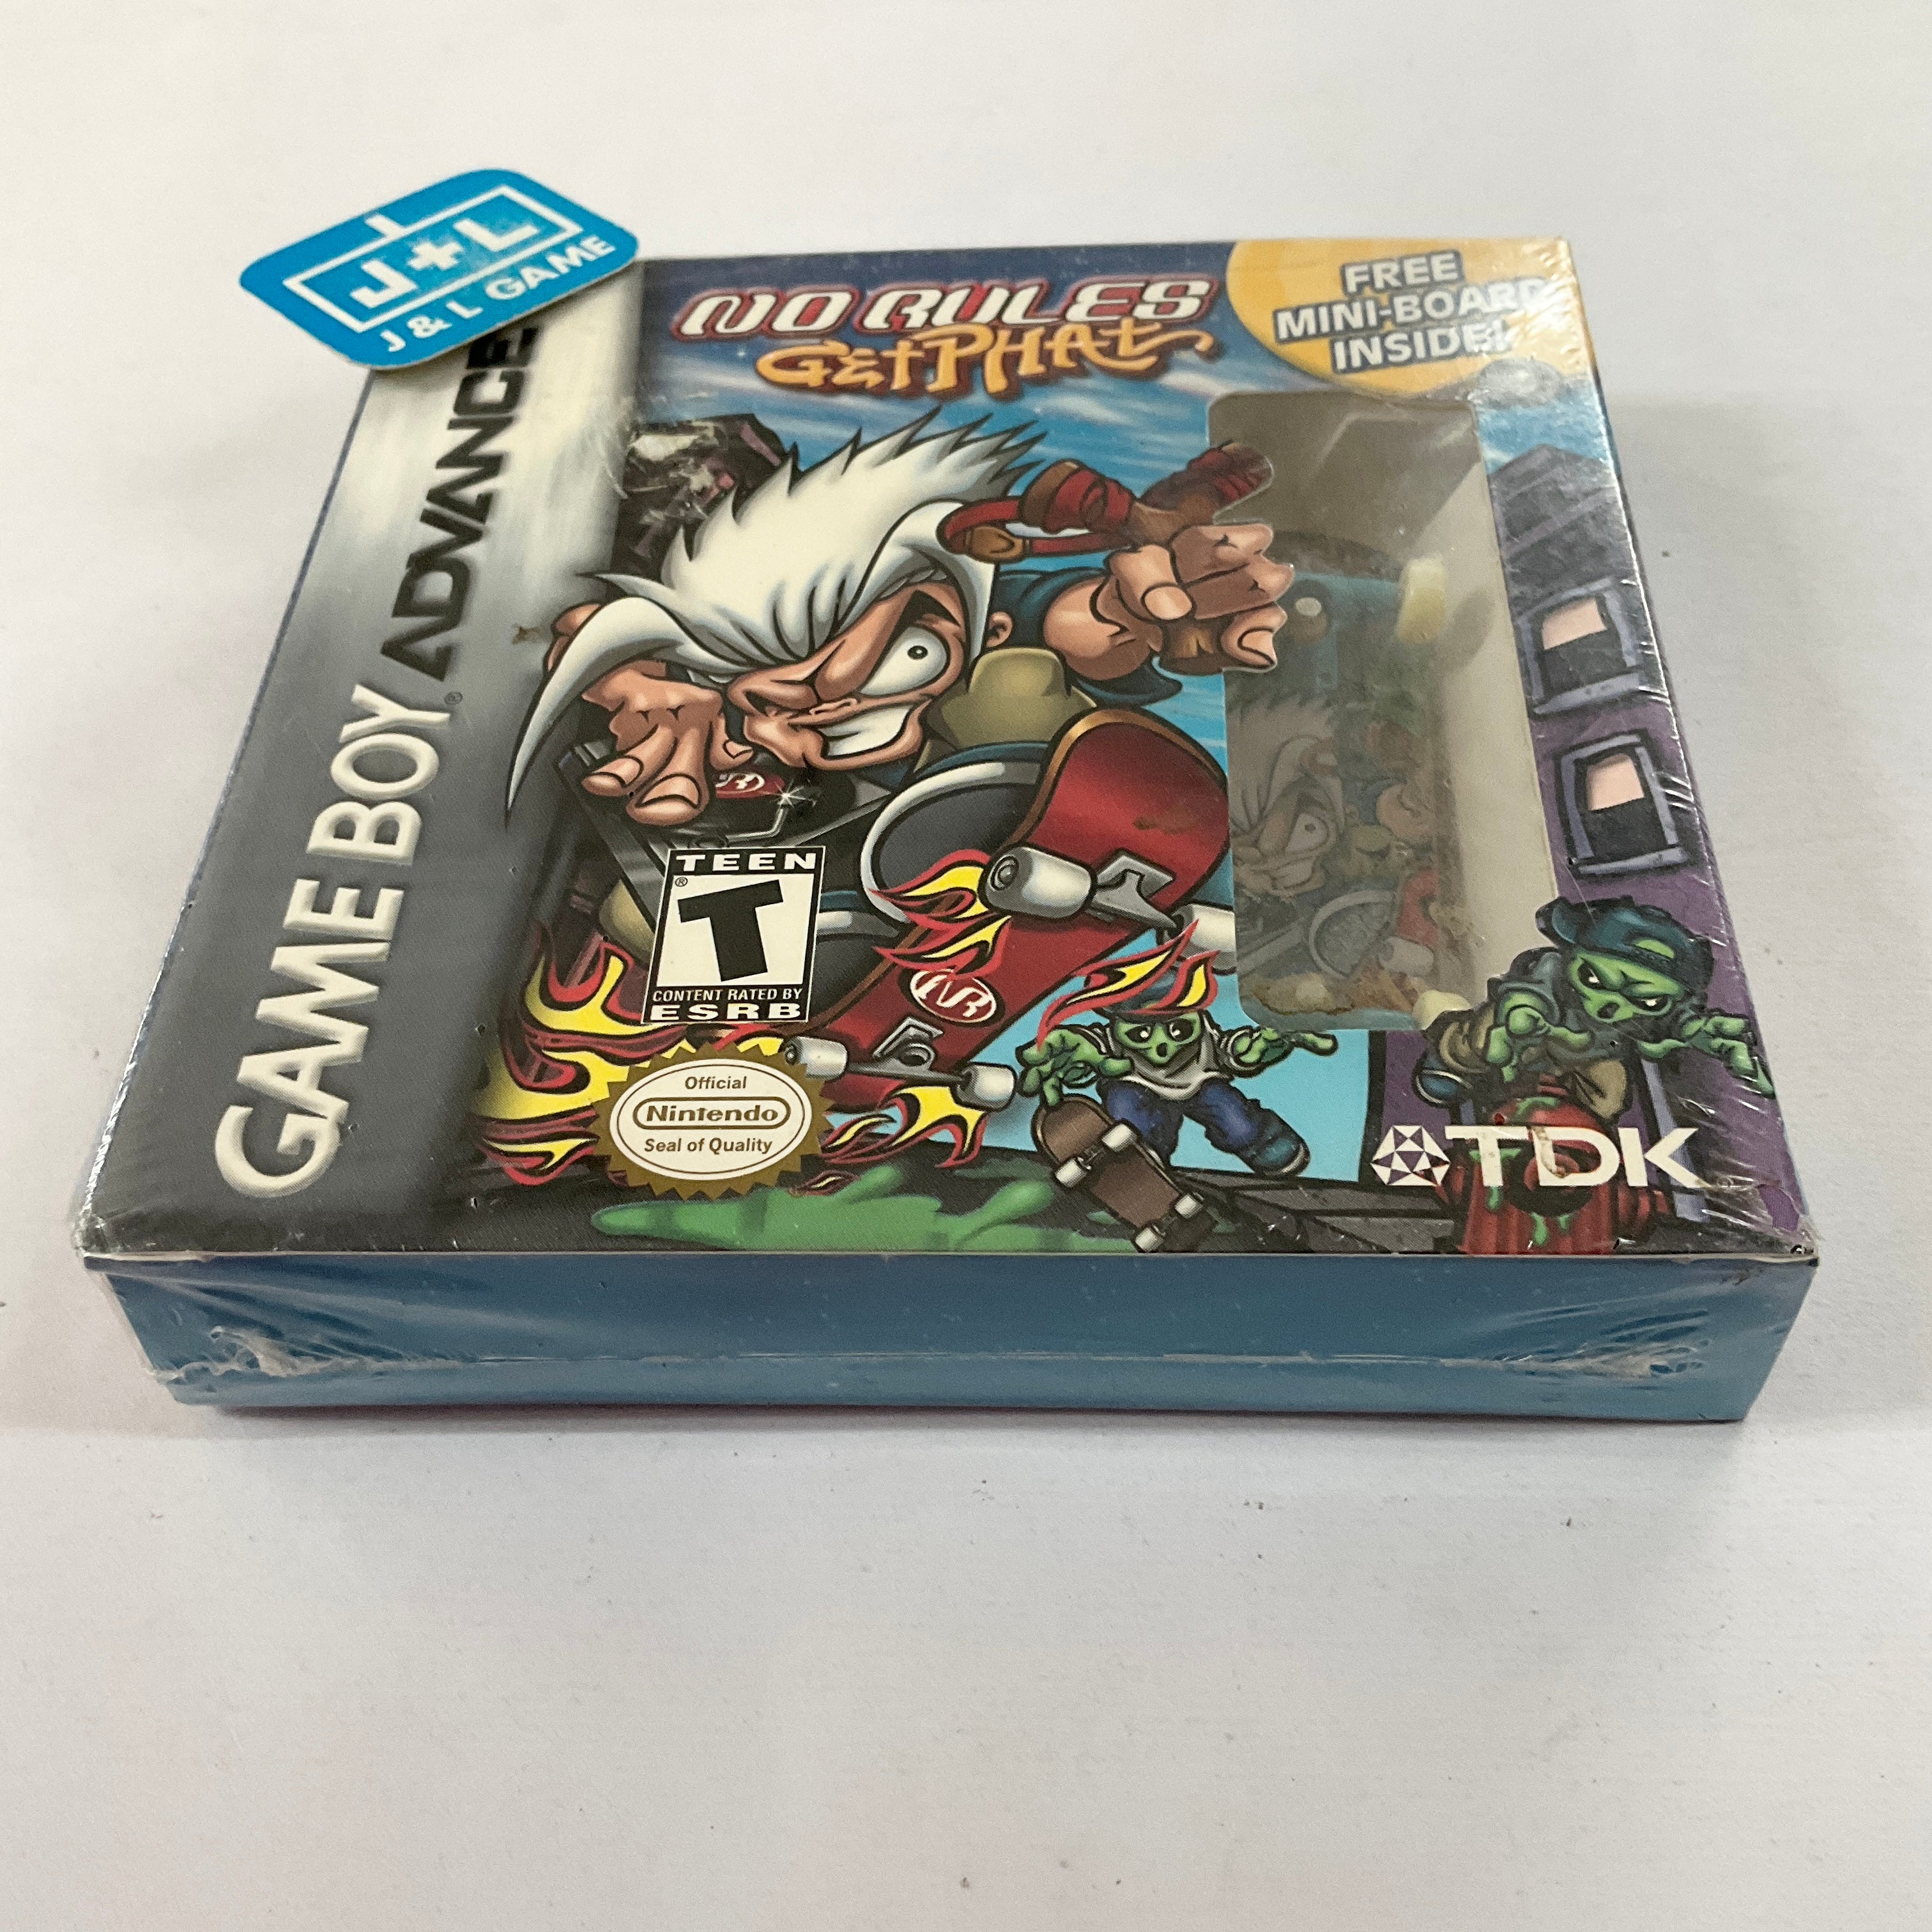 No Rules: Get Phat - (GBA) Game Boy Advance